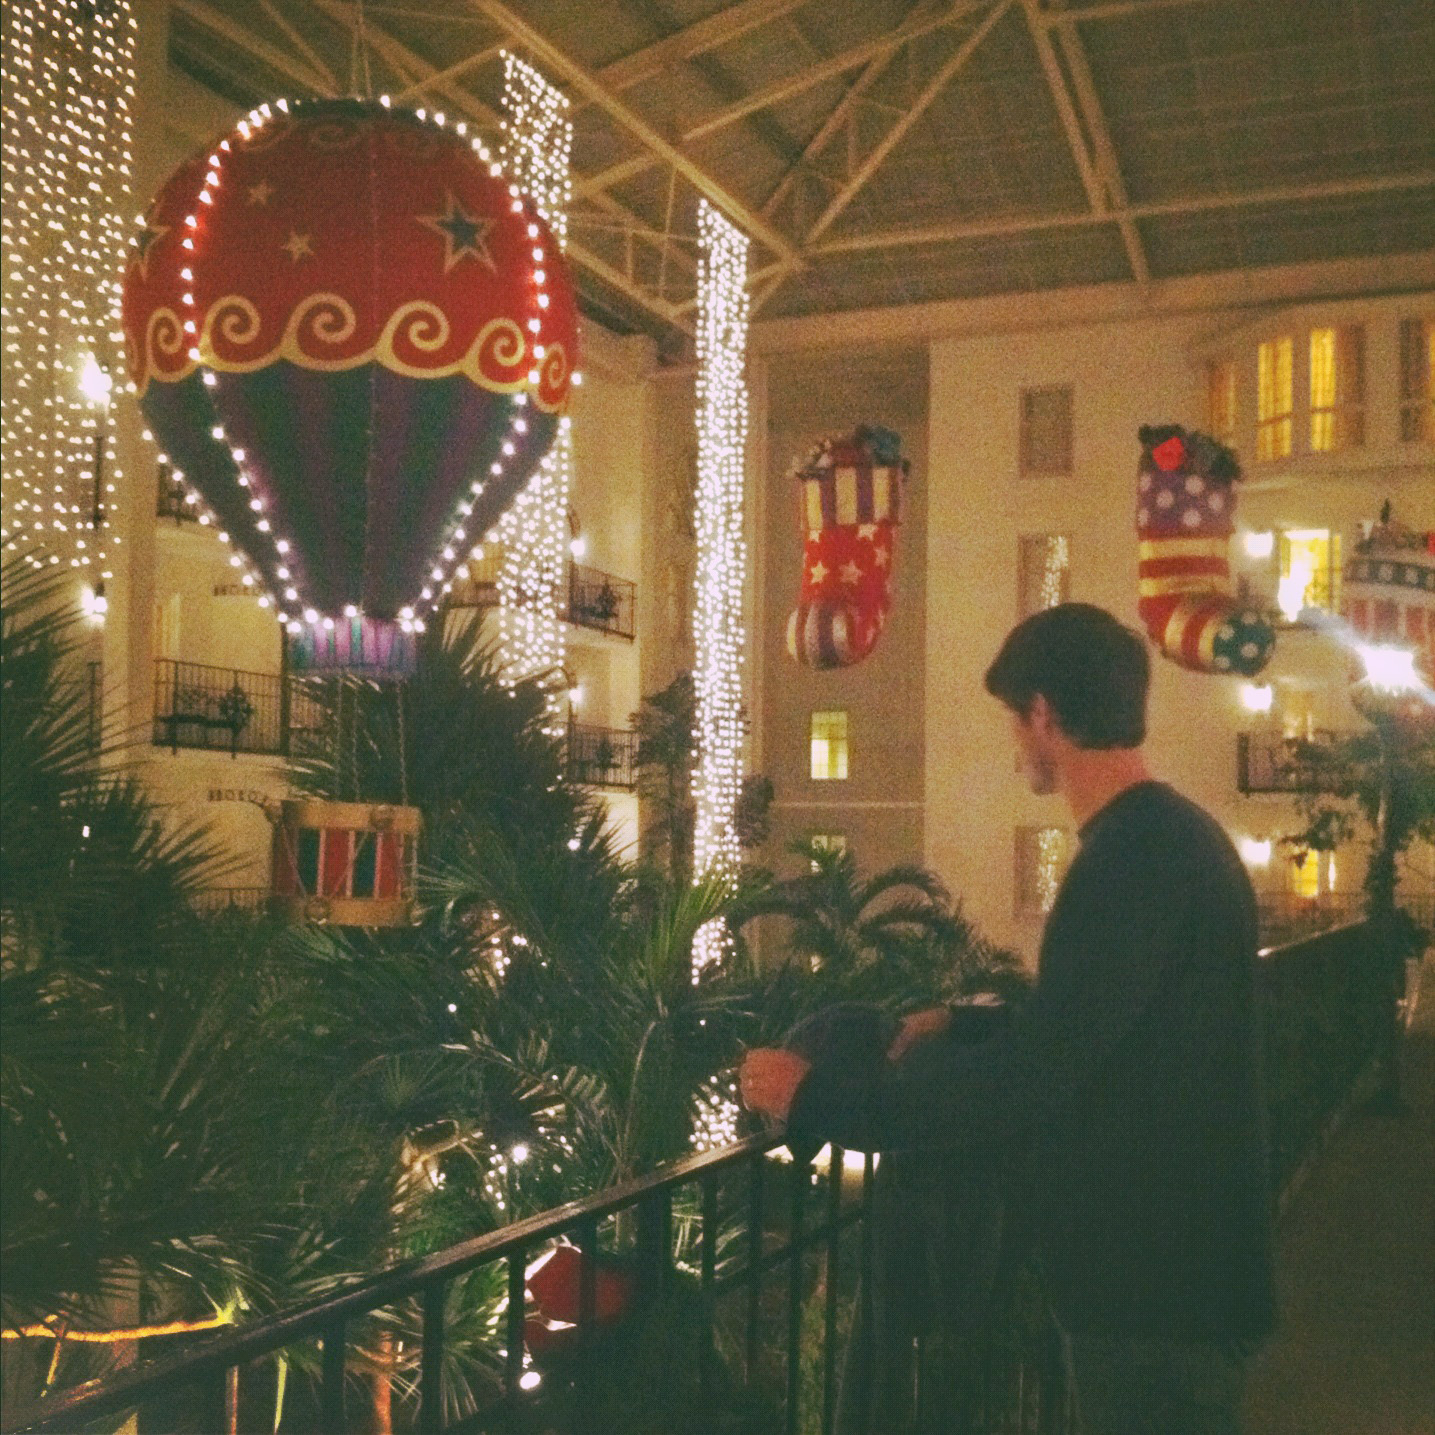 a few more visions from sunday evening at opryland